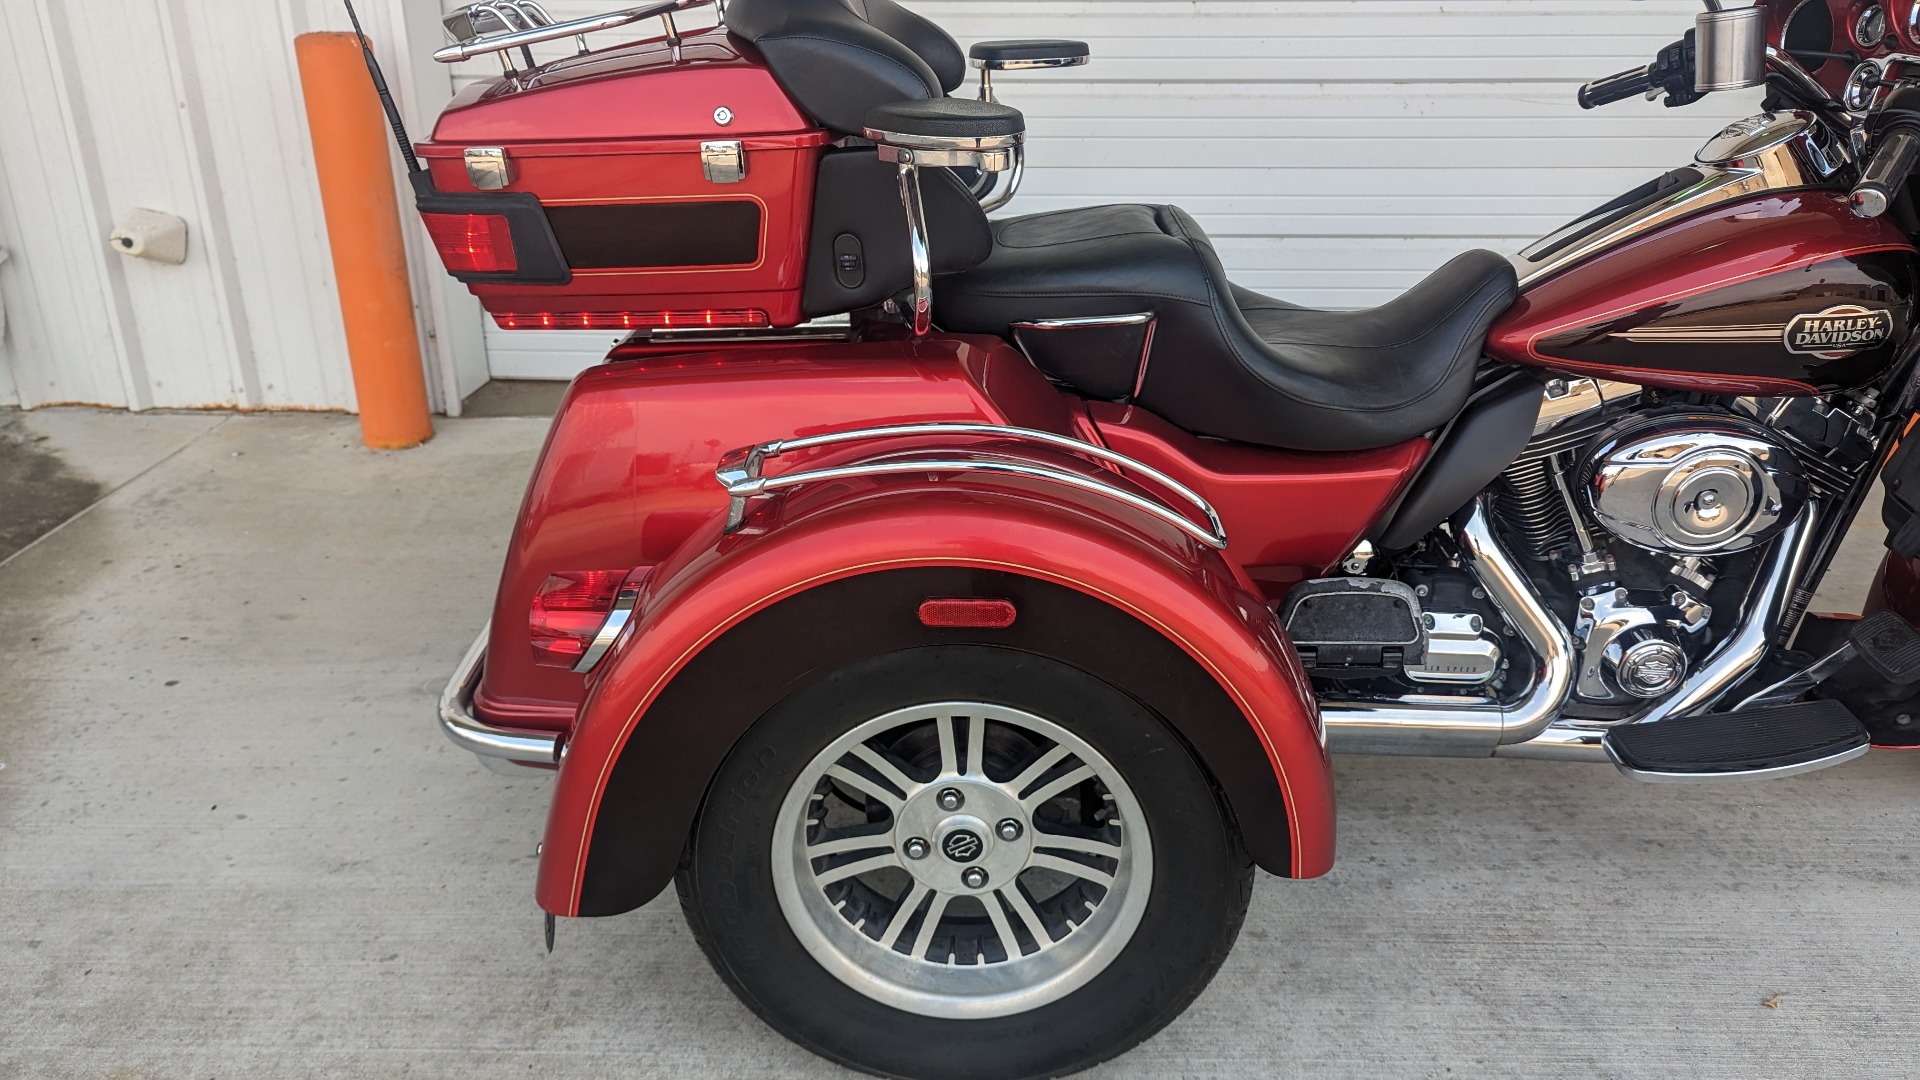 2012 harley davidson tri glide ultra classic red for sale in mississippi - Photo 5